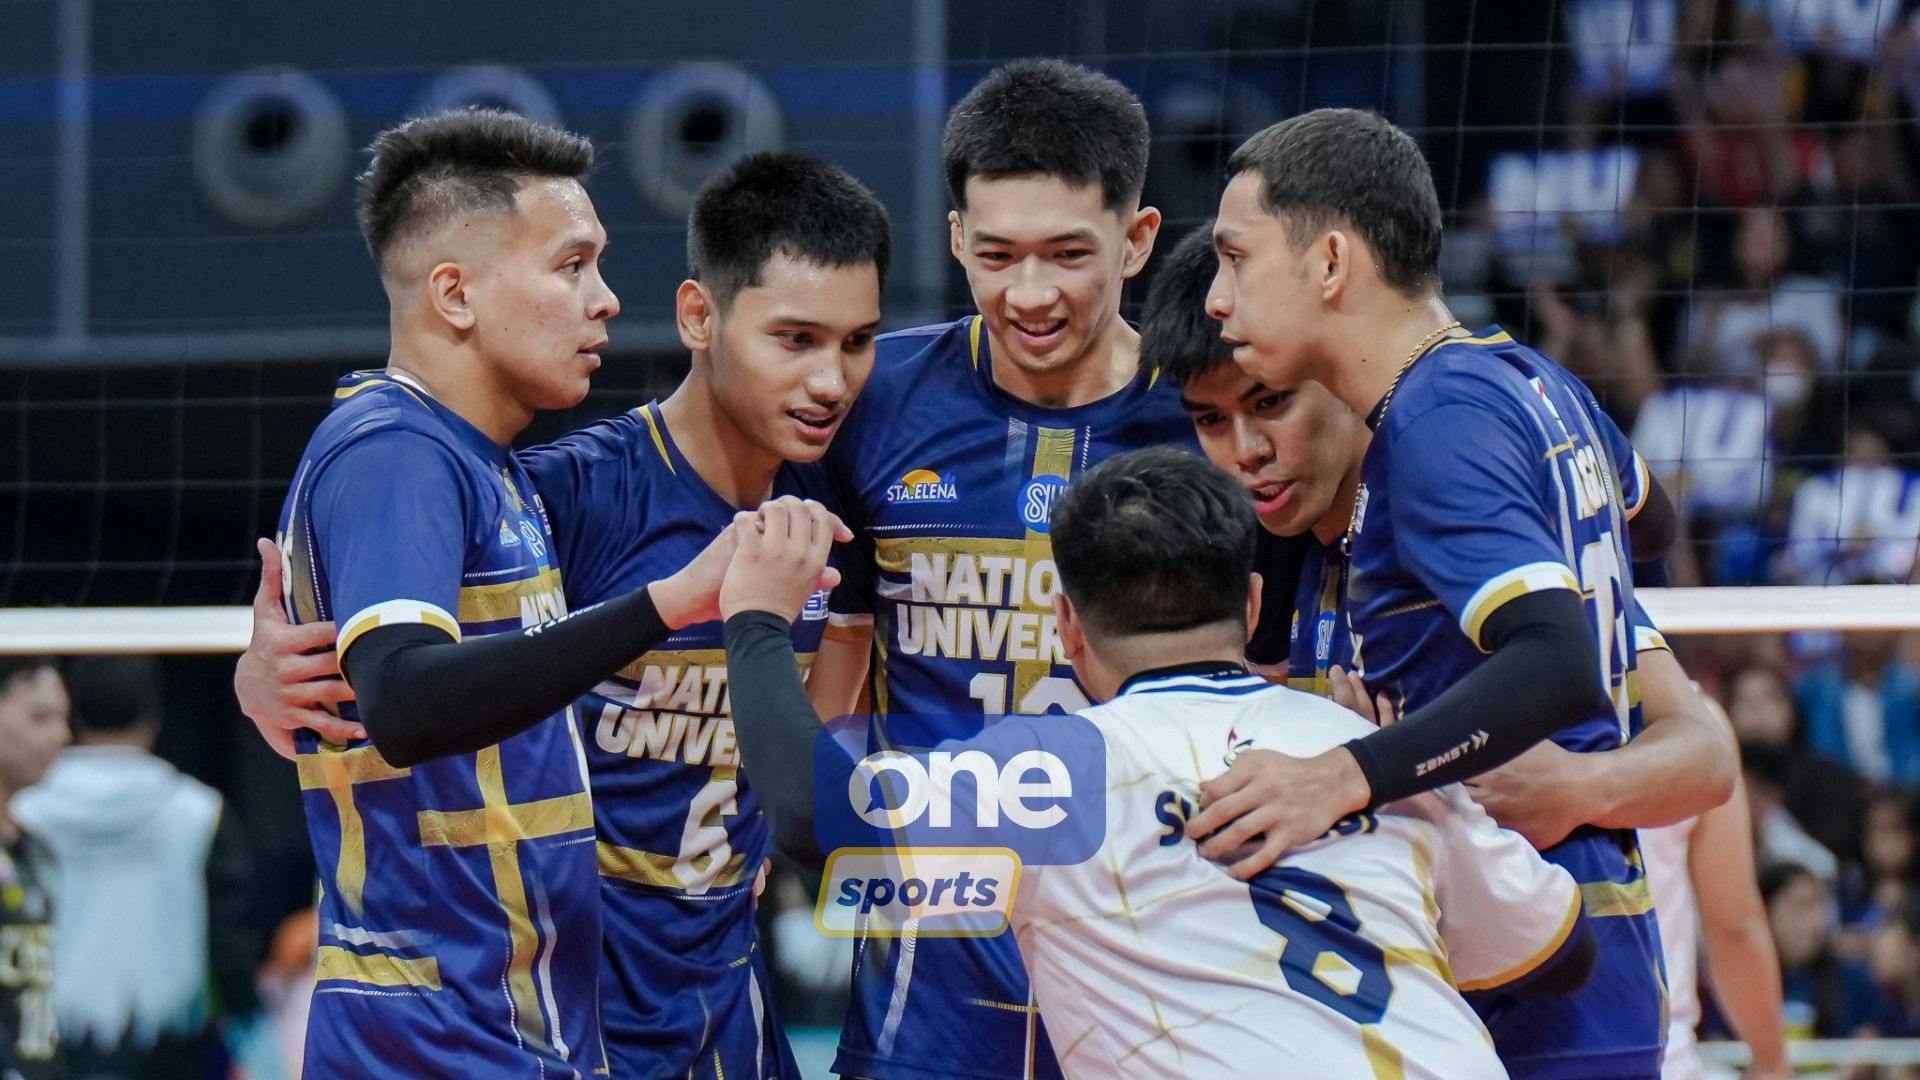 UAAP: NU Bulldogs complete rare 4-peat after closing out UST in Game 2